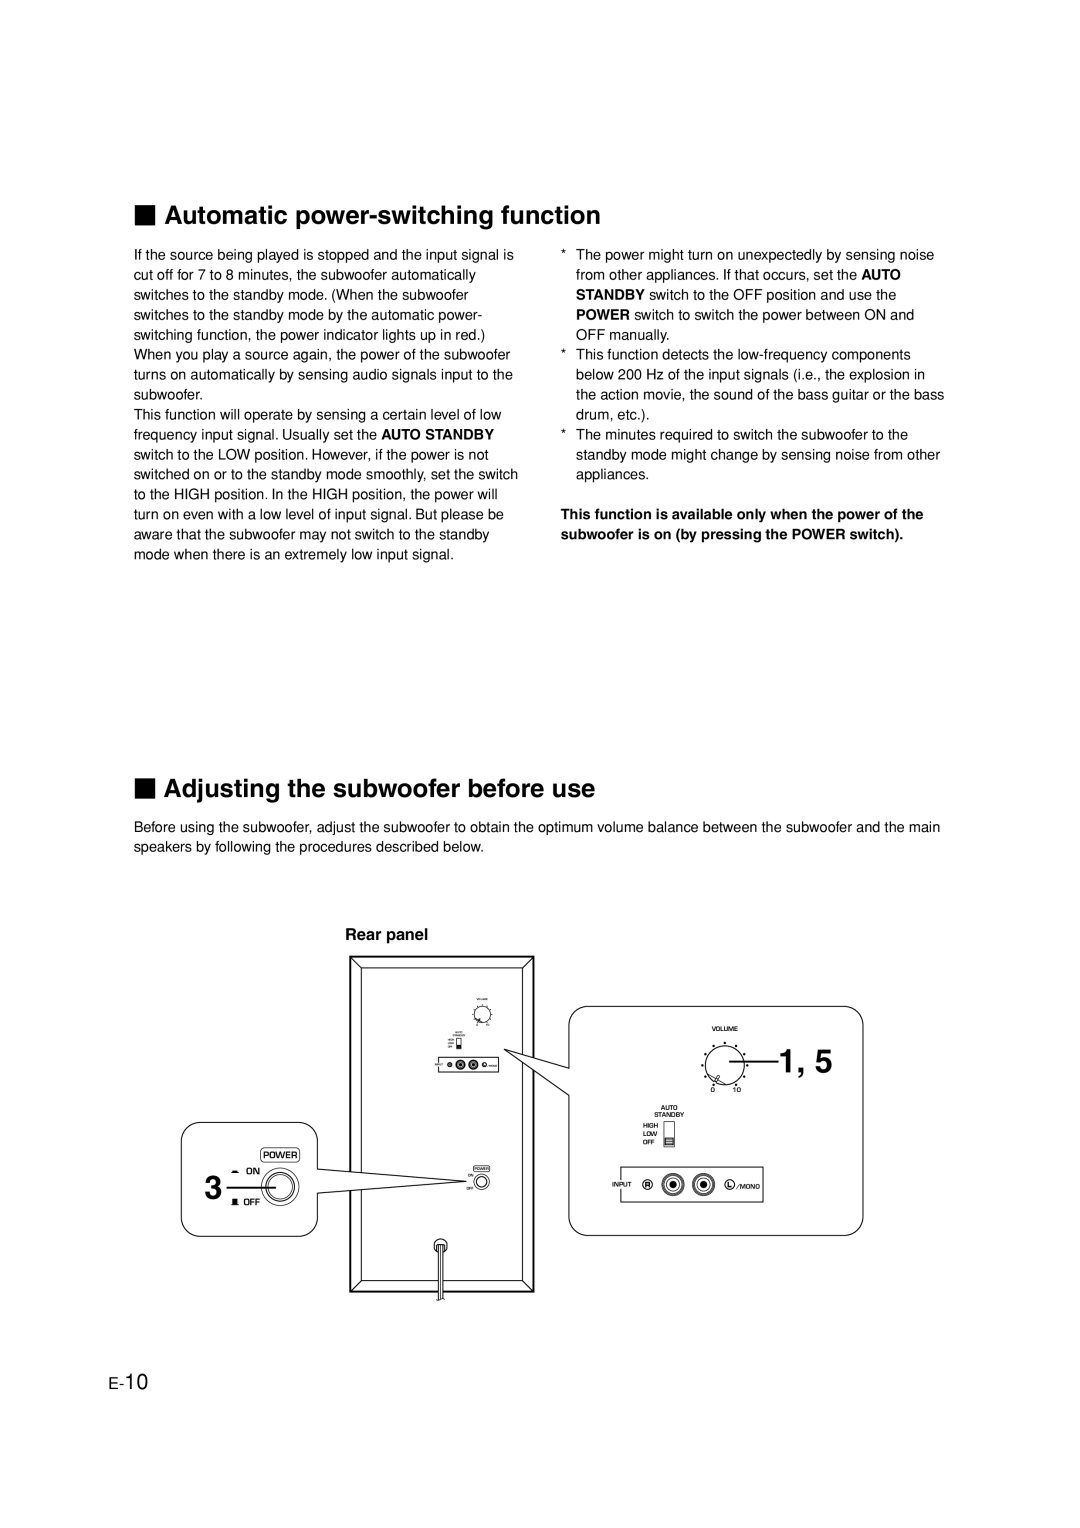 Yamaha HTR-5630RDS owner manual  Automatic power-switching function,  Adjusting the subwoofer before use, Rear panel 